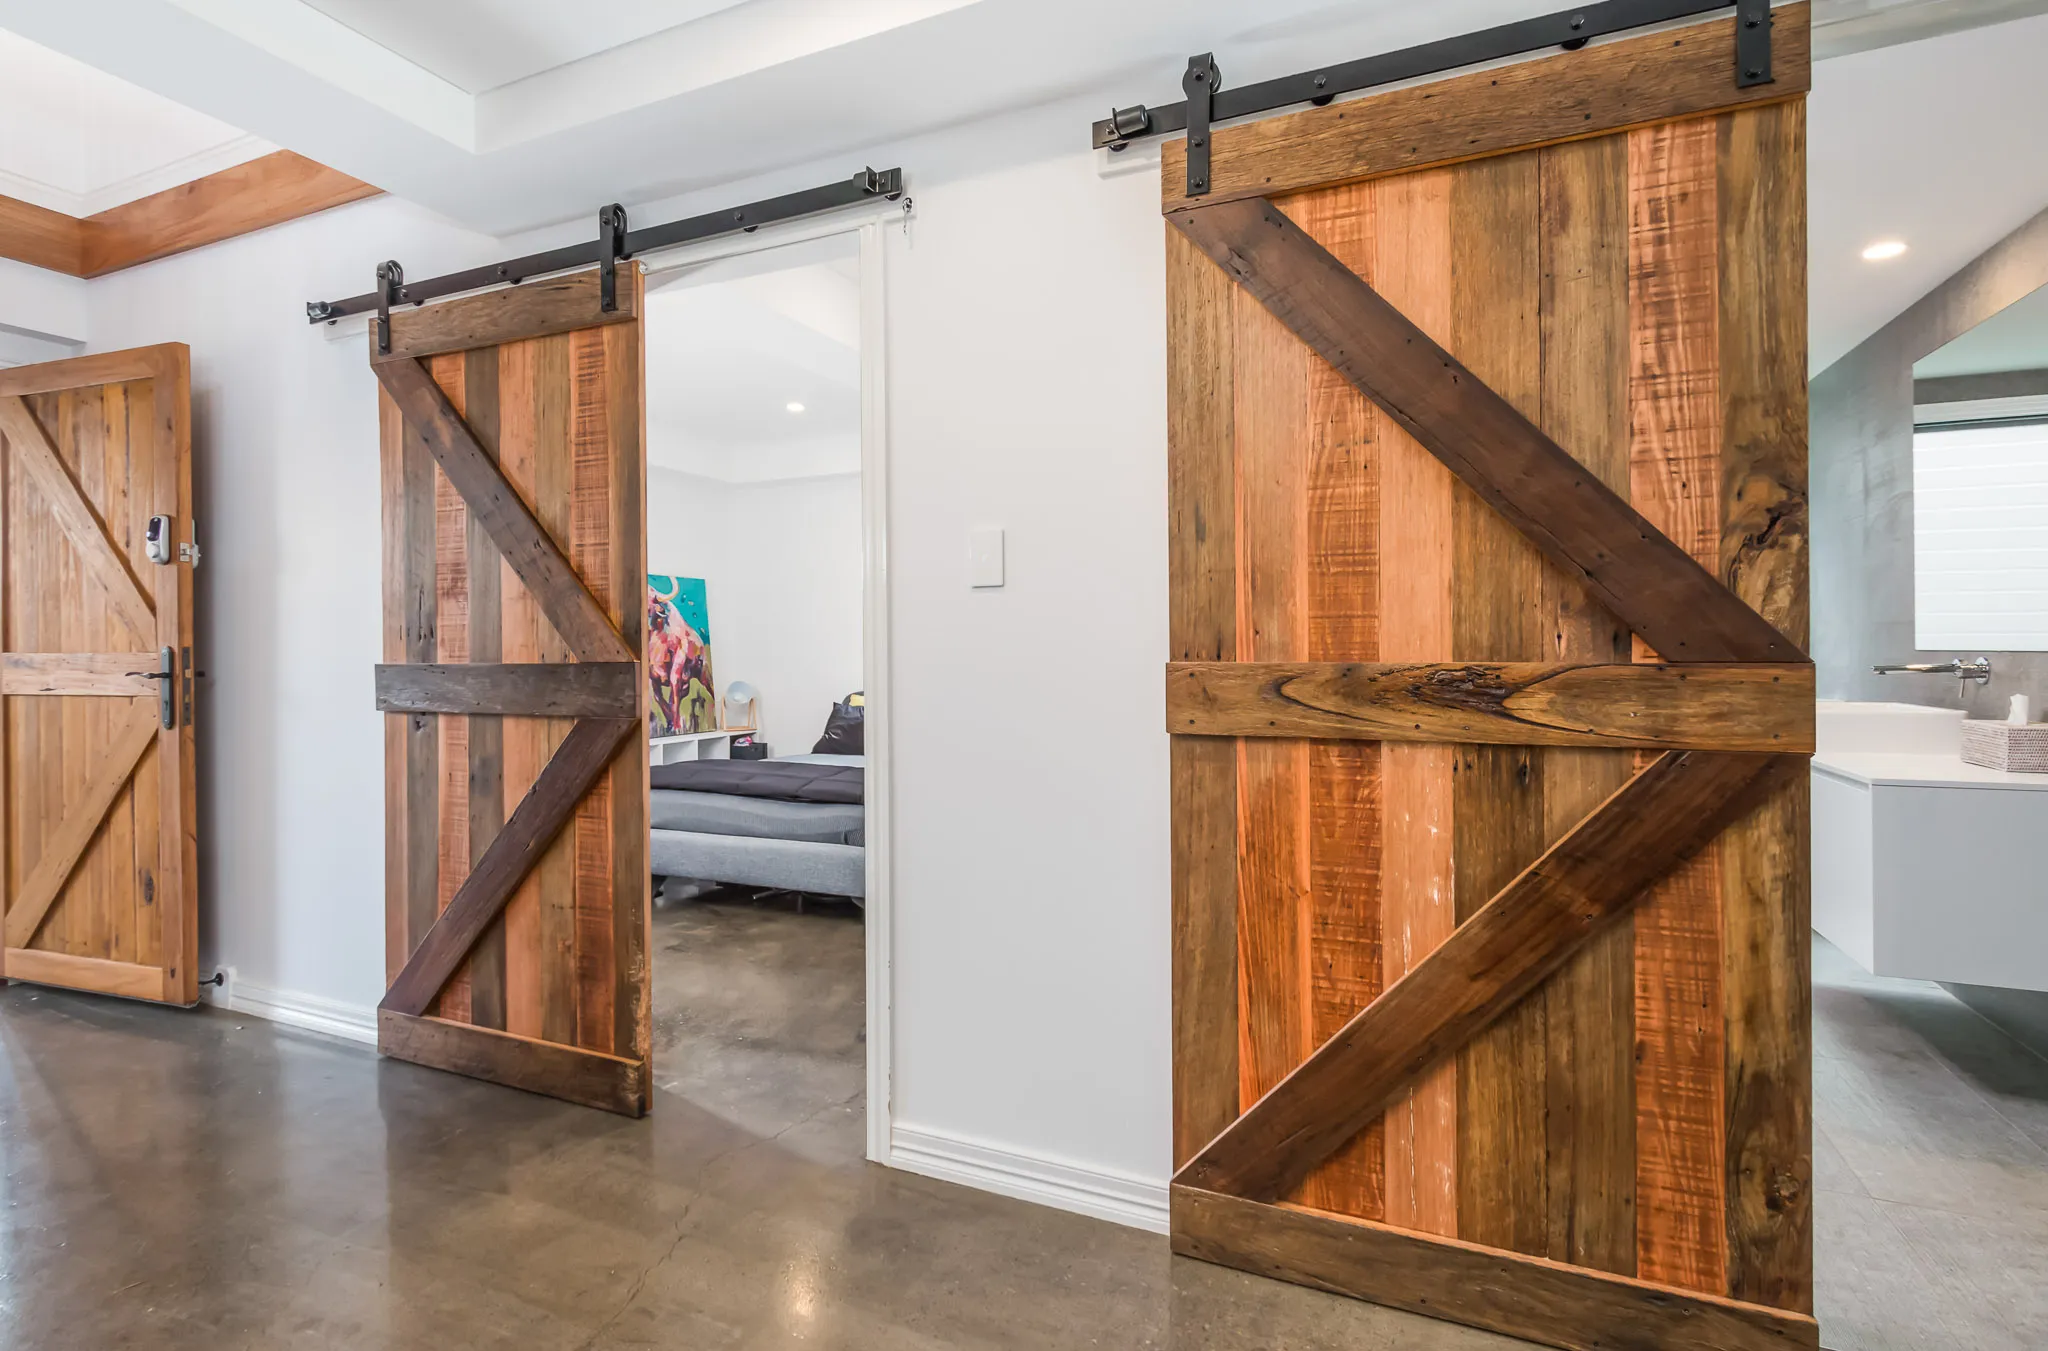 Barn doors and polished concrete floors